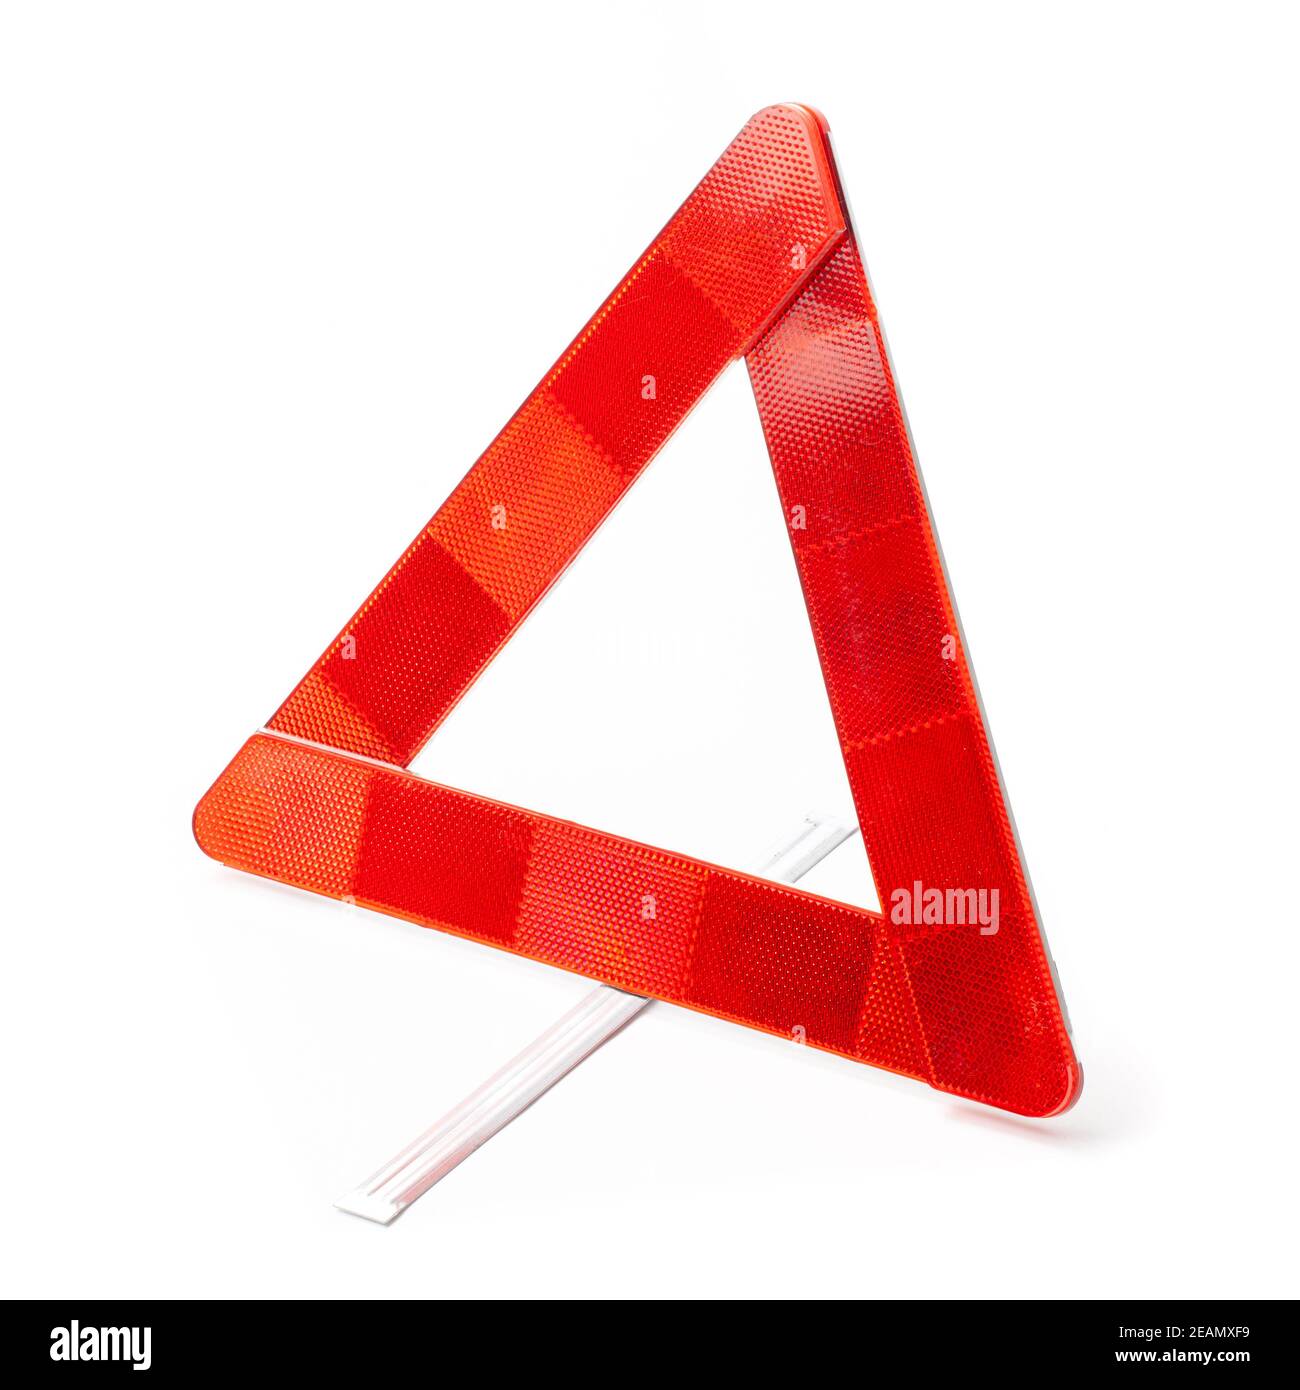 Collapsible red road triangle isolated on white background Stock Photo